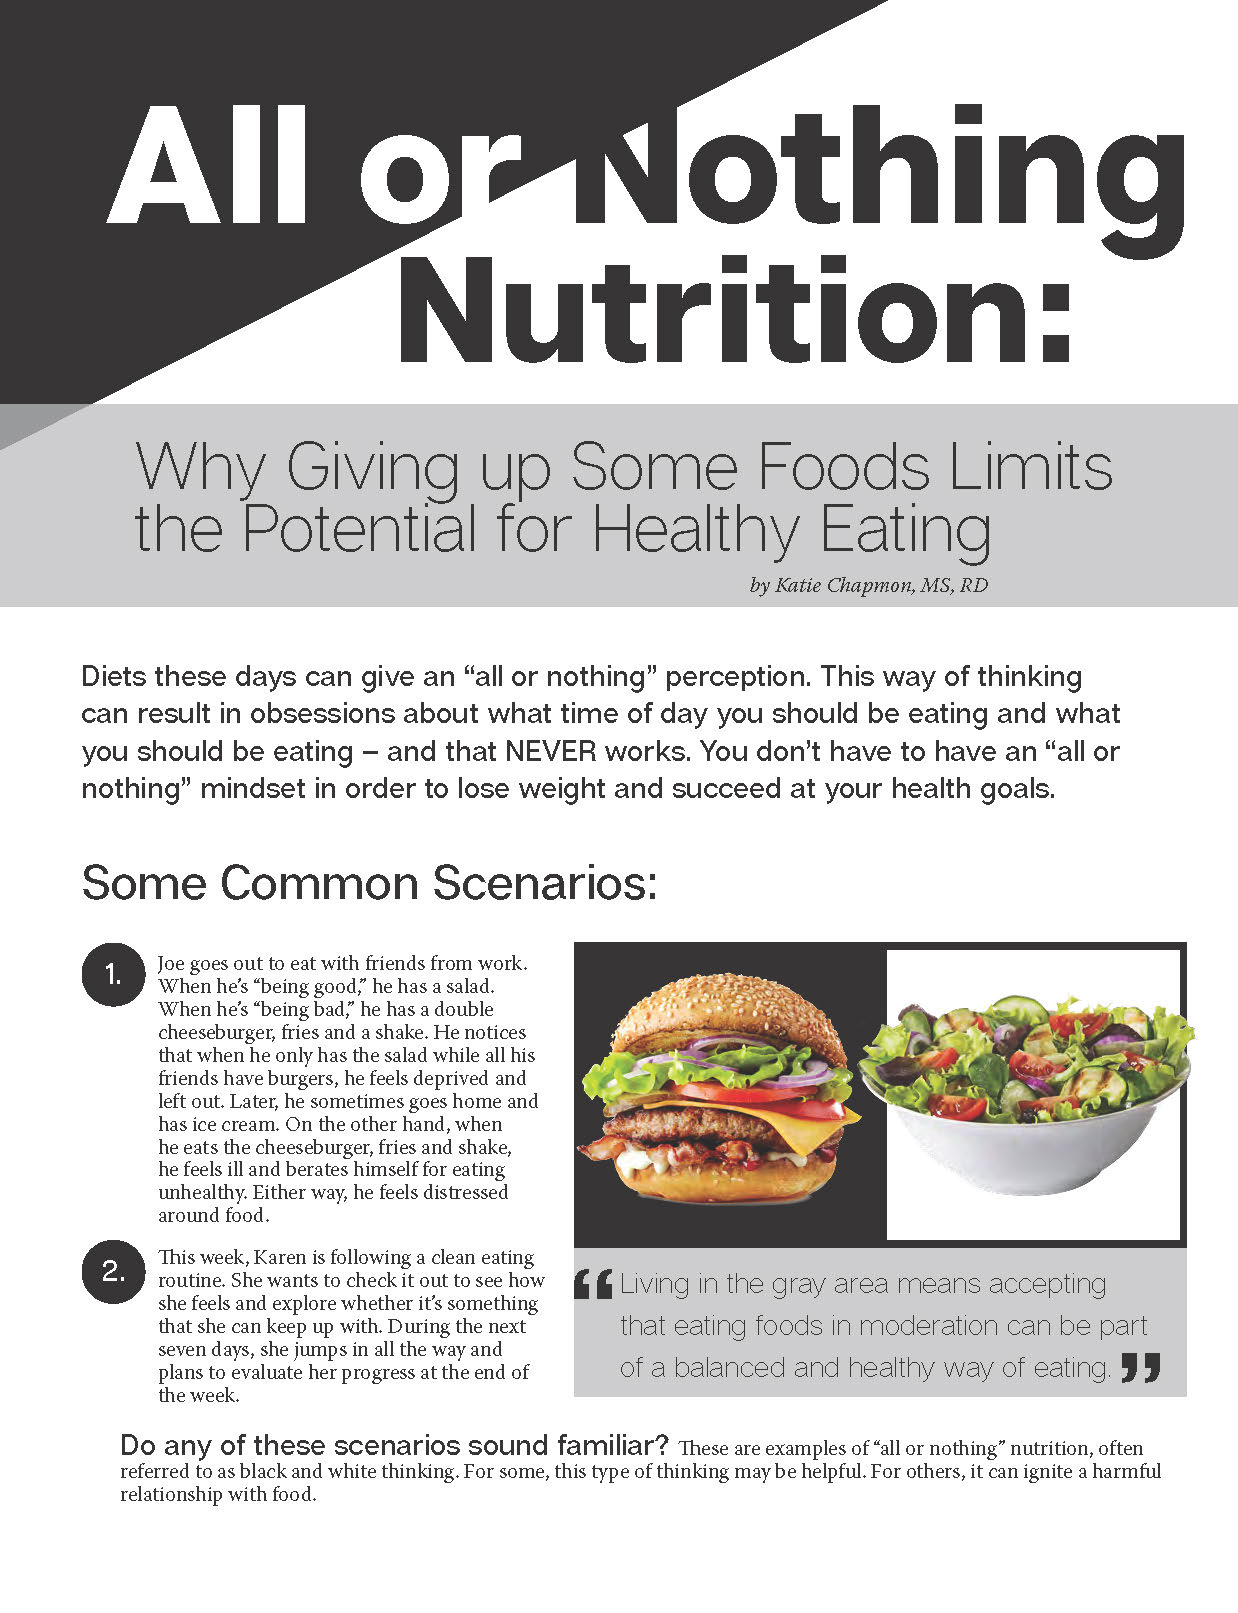 All or Nothing Nutrition: Why Giving up Some Foods Limits the